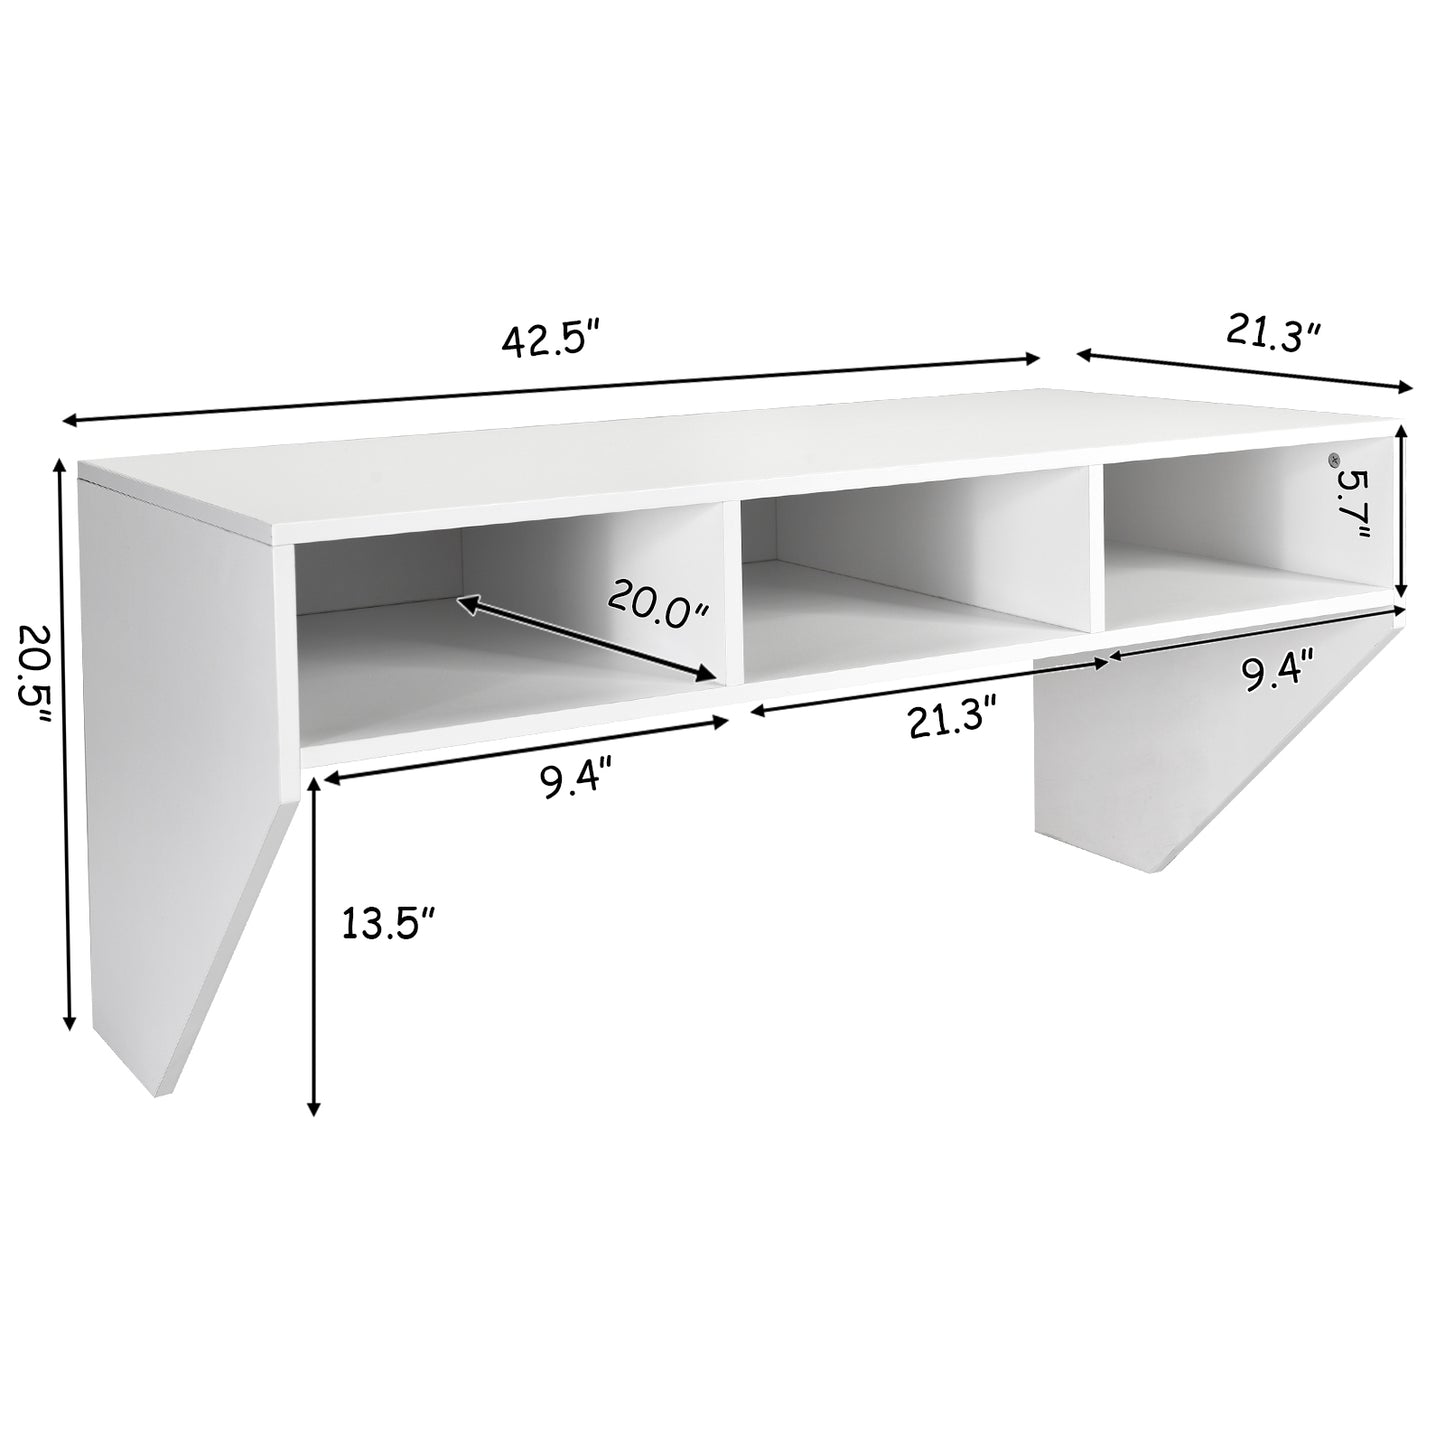 Wall Mounted Floating Computer Table Desk Storage Shelf-White